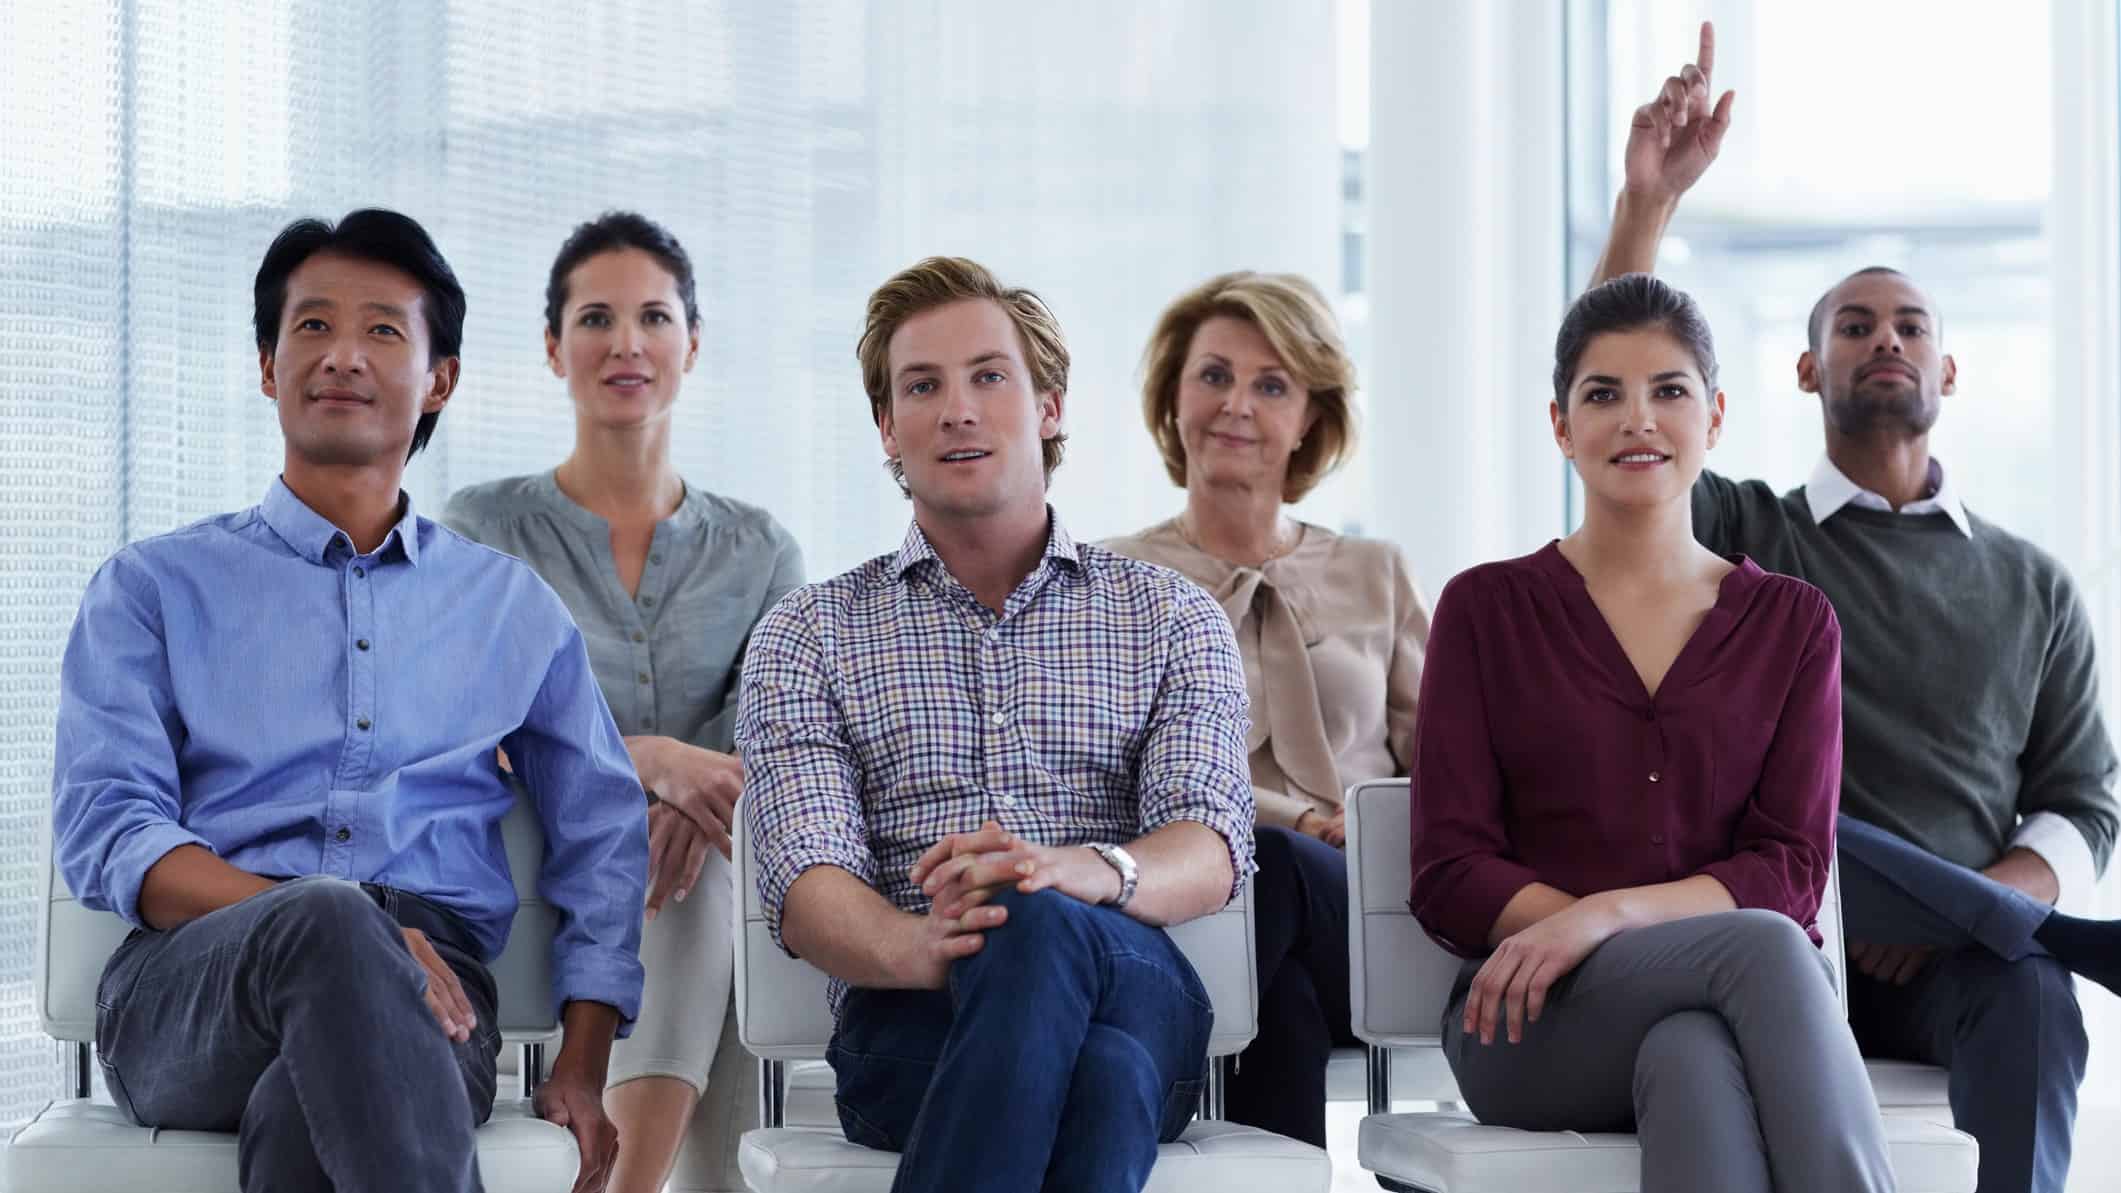 People sitting in rows in a meeting with one person holding their hand up as if to ask a question.